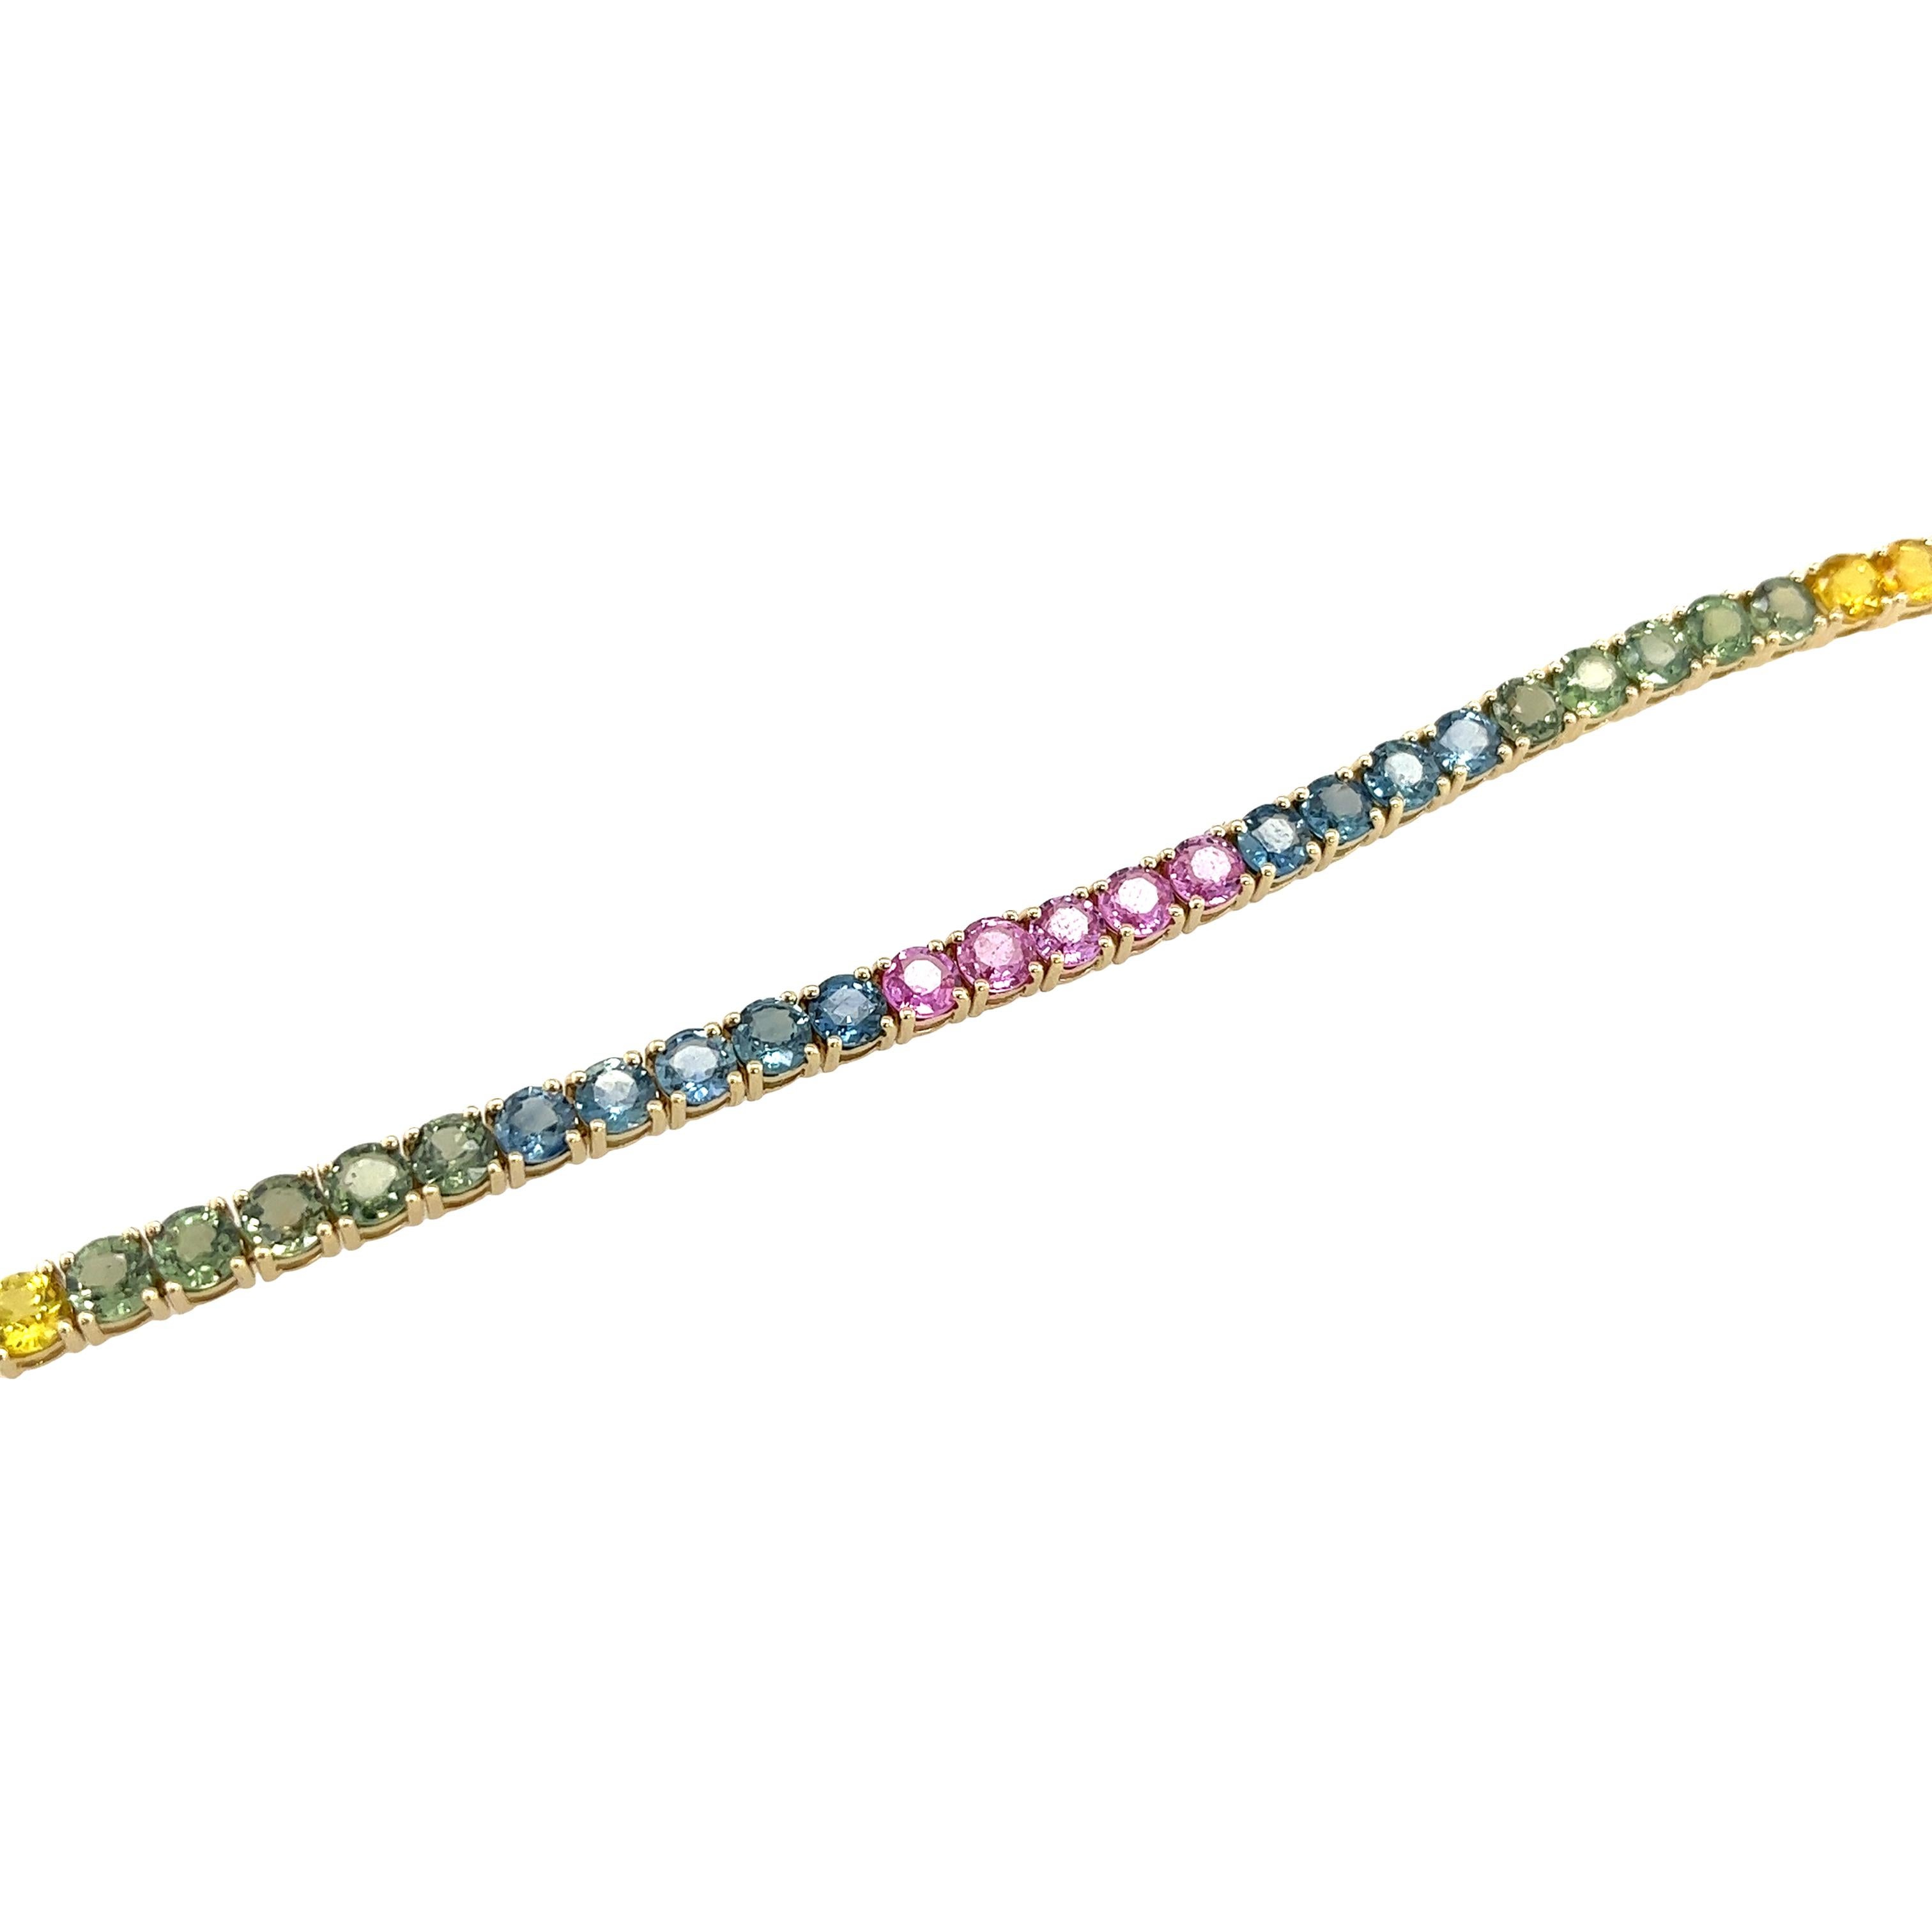 This bracelet is made of 14ct yellow gold and set with 44 round natural round multicolor sapphires, and has a beautiful finish. This design is ideal for everyday wear.

Total Sapphire Weight: 16ct
Total Weight: 13.1g
Bracelet Length: 7.5